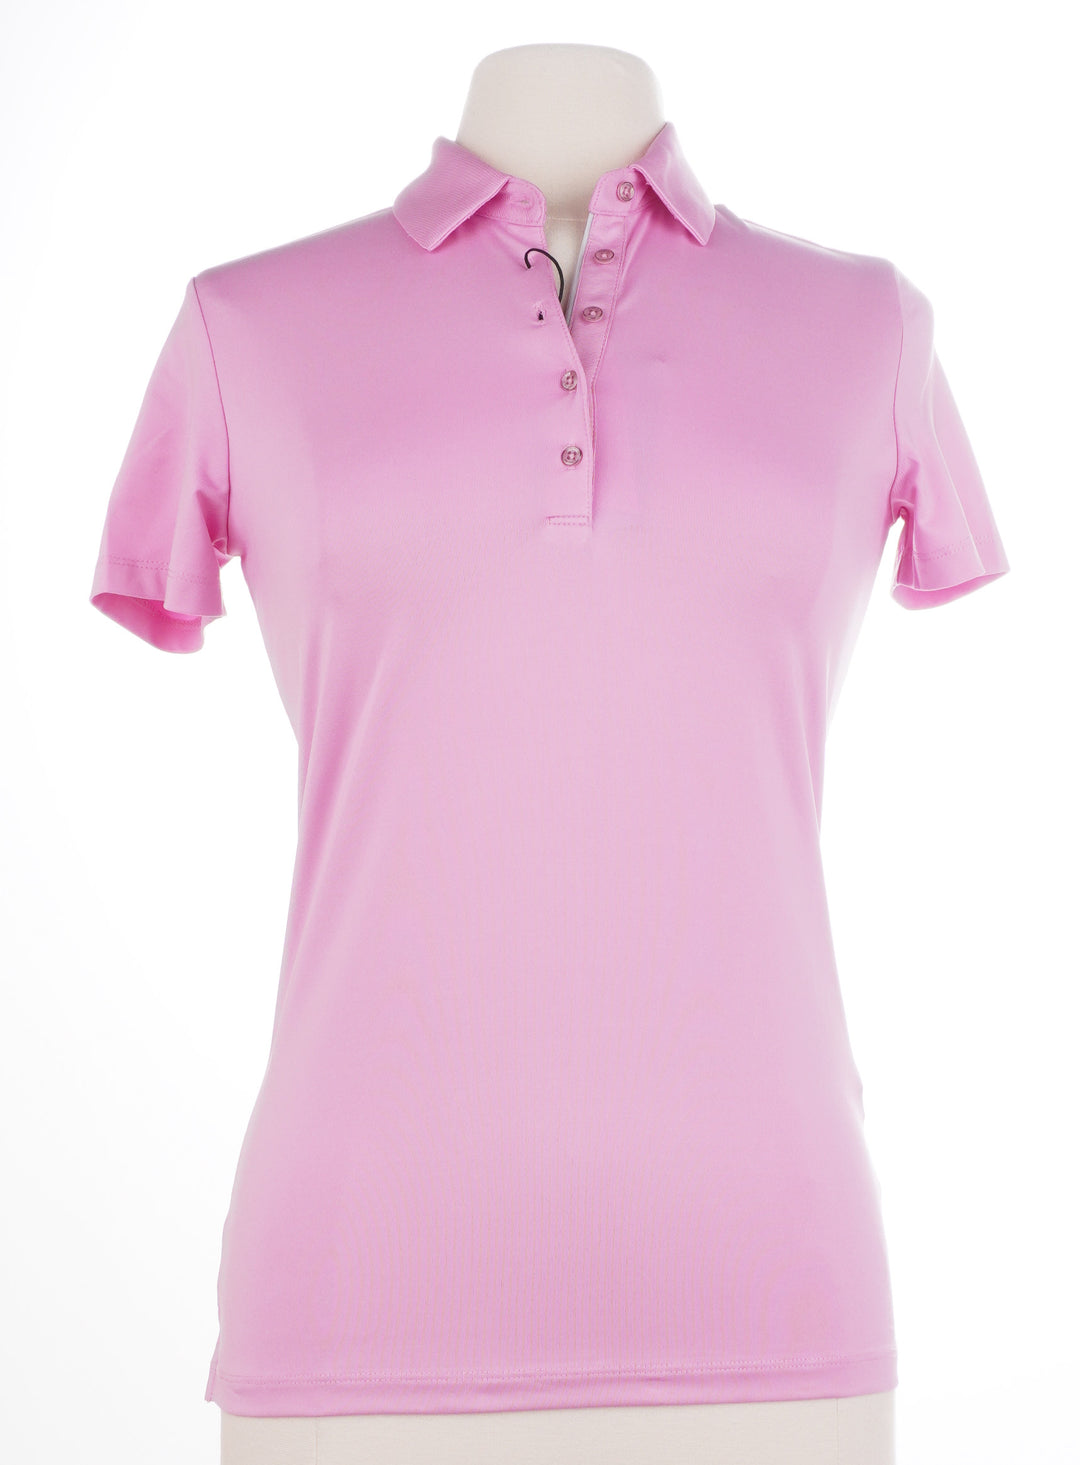 Dunning Golf Player Performance Polo - Ballet - Size Small - Skorzie